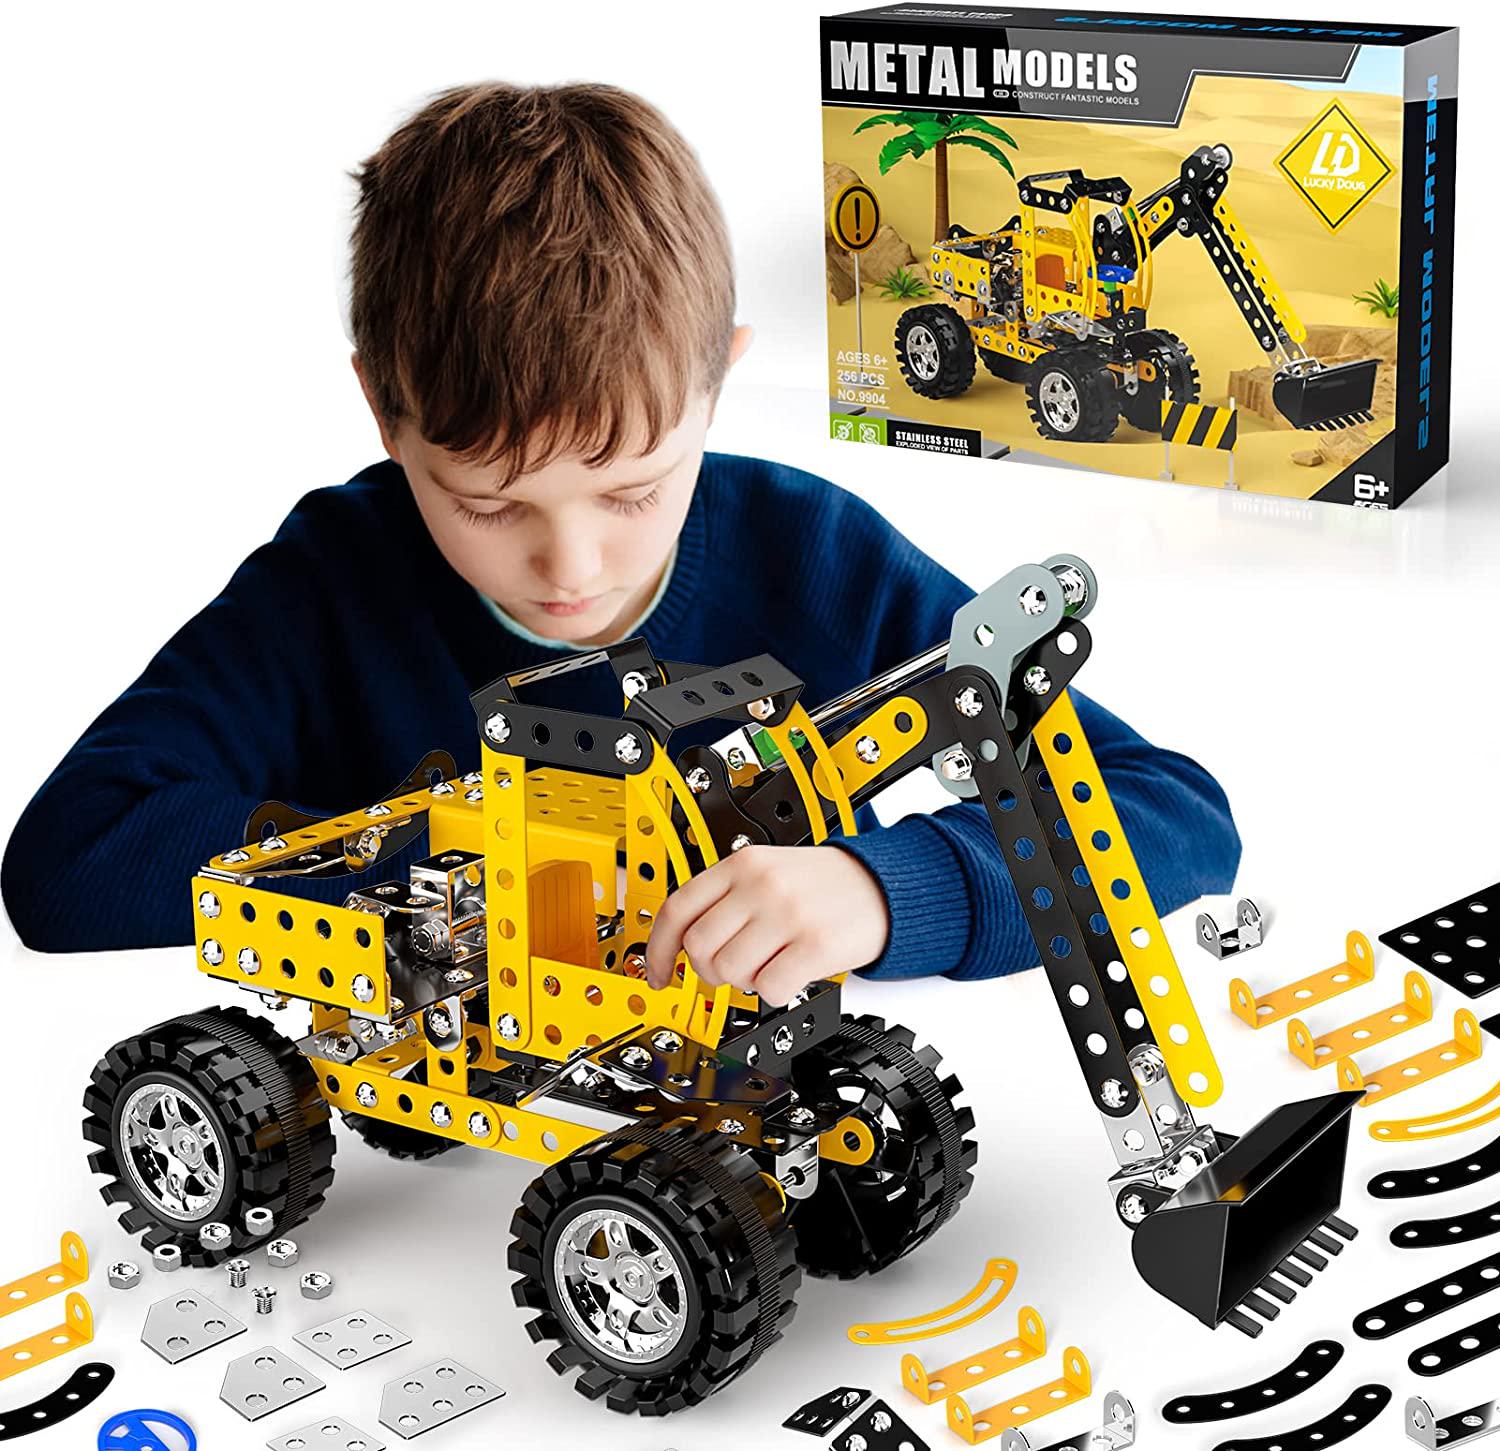 Lucky Doug, Lucky Doug Construction Toys Bulldozer Model Set - 256 Pieces Building STEM Project Toys for Kids Boys Ages 8-12 and Order, Building Assembly Science Educational Set Gifts for Model Bulldozer Fans